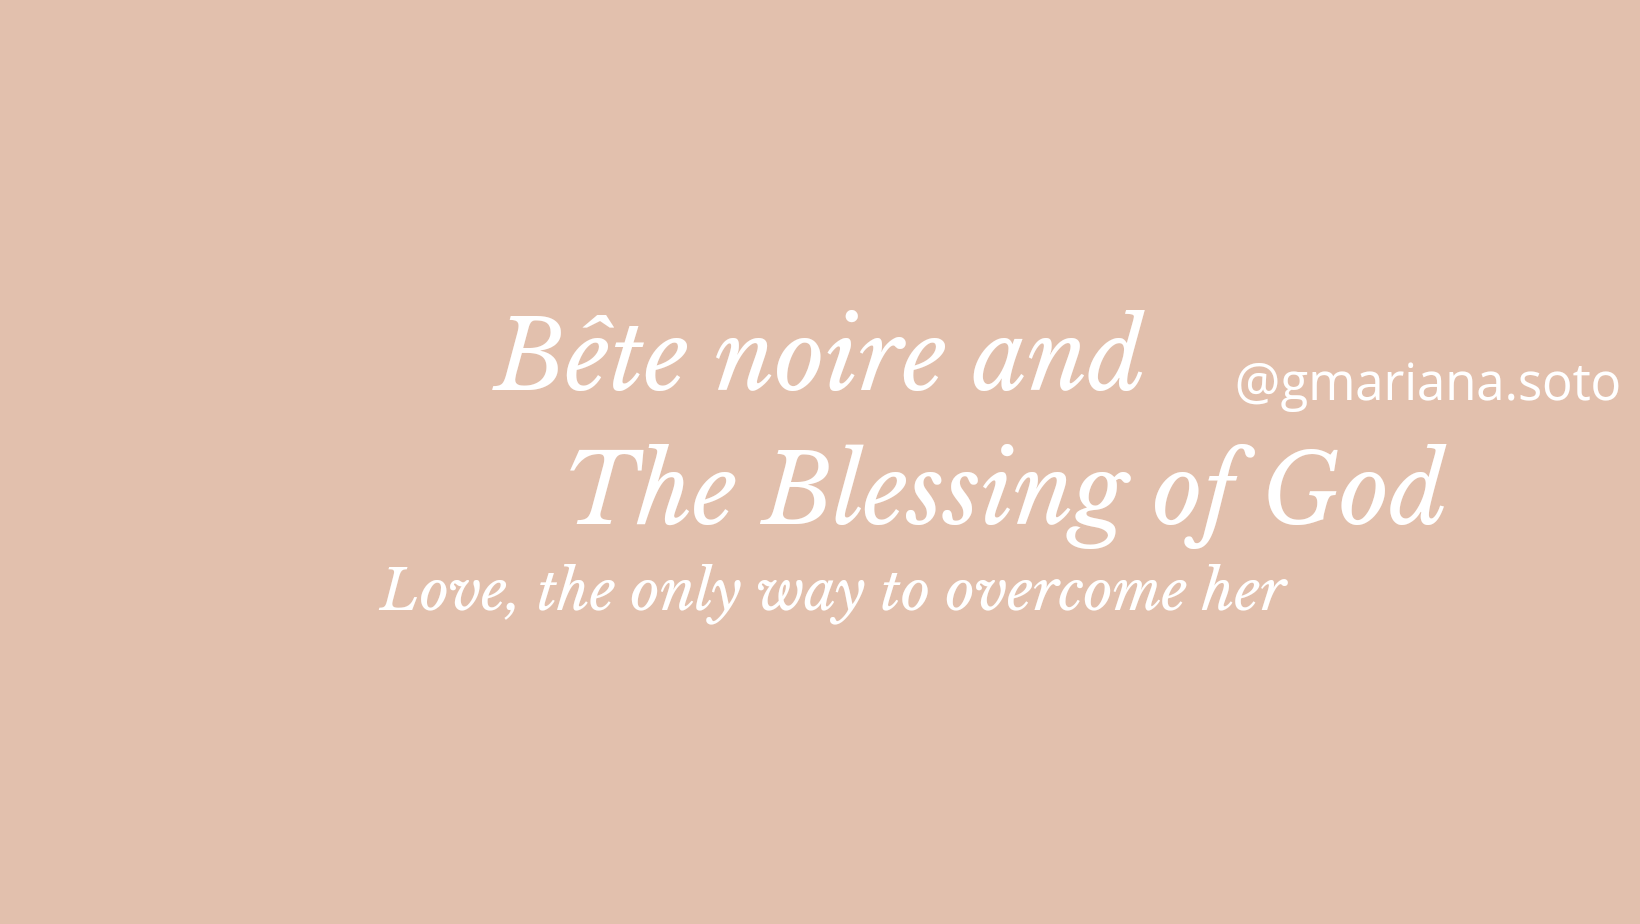 Bête noire and The Blessing of God